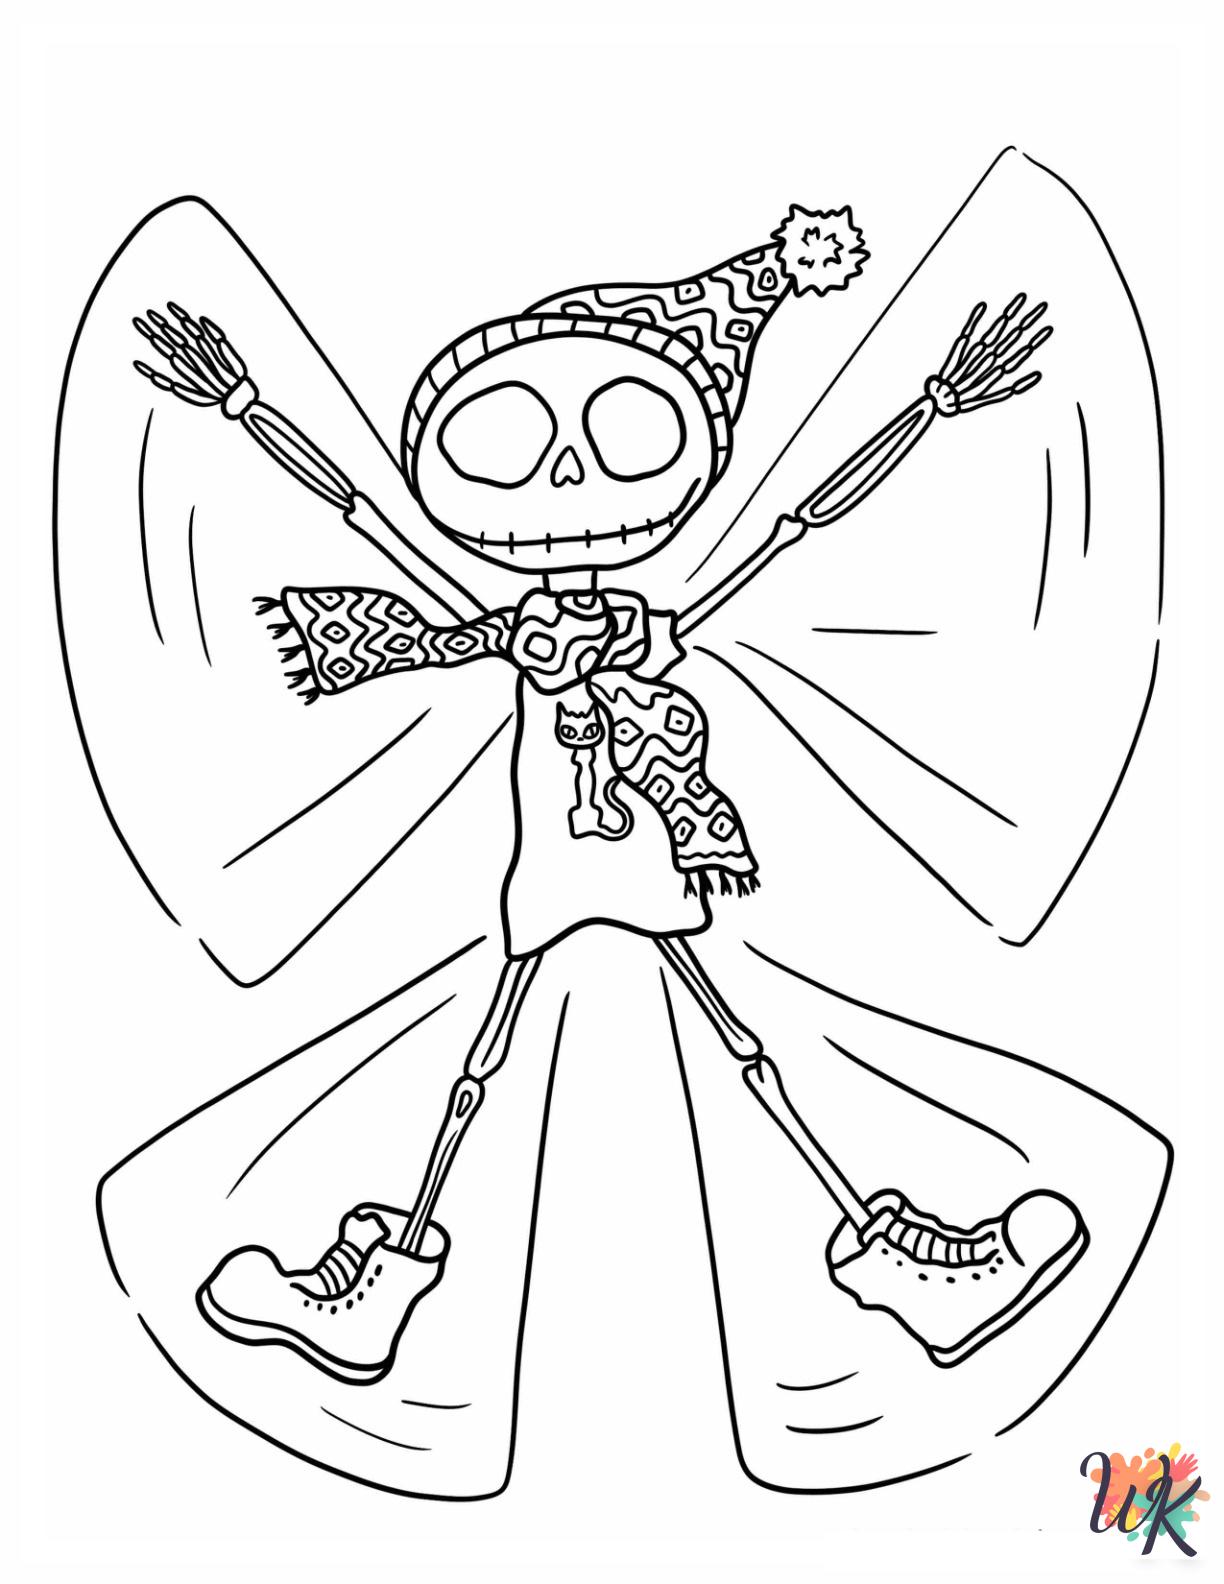 Skeleton ornament coloring pages